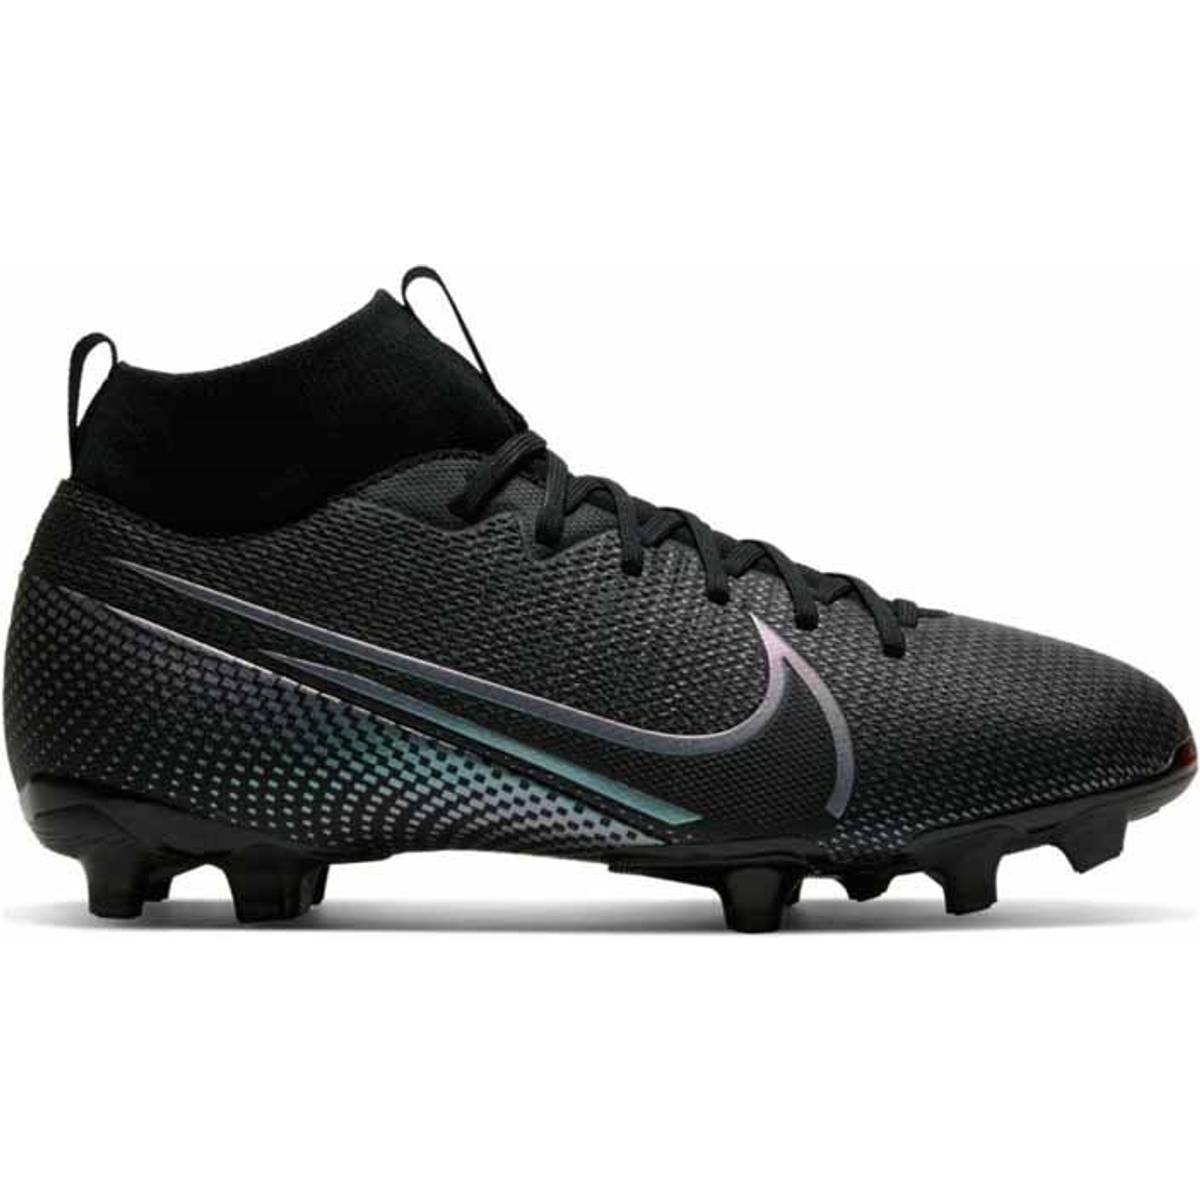 Mercurial Superfly 7 Elite Turf Cleat by Nike New Lights Pack.